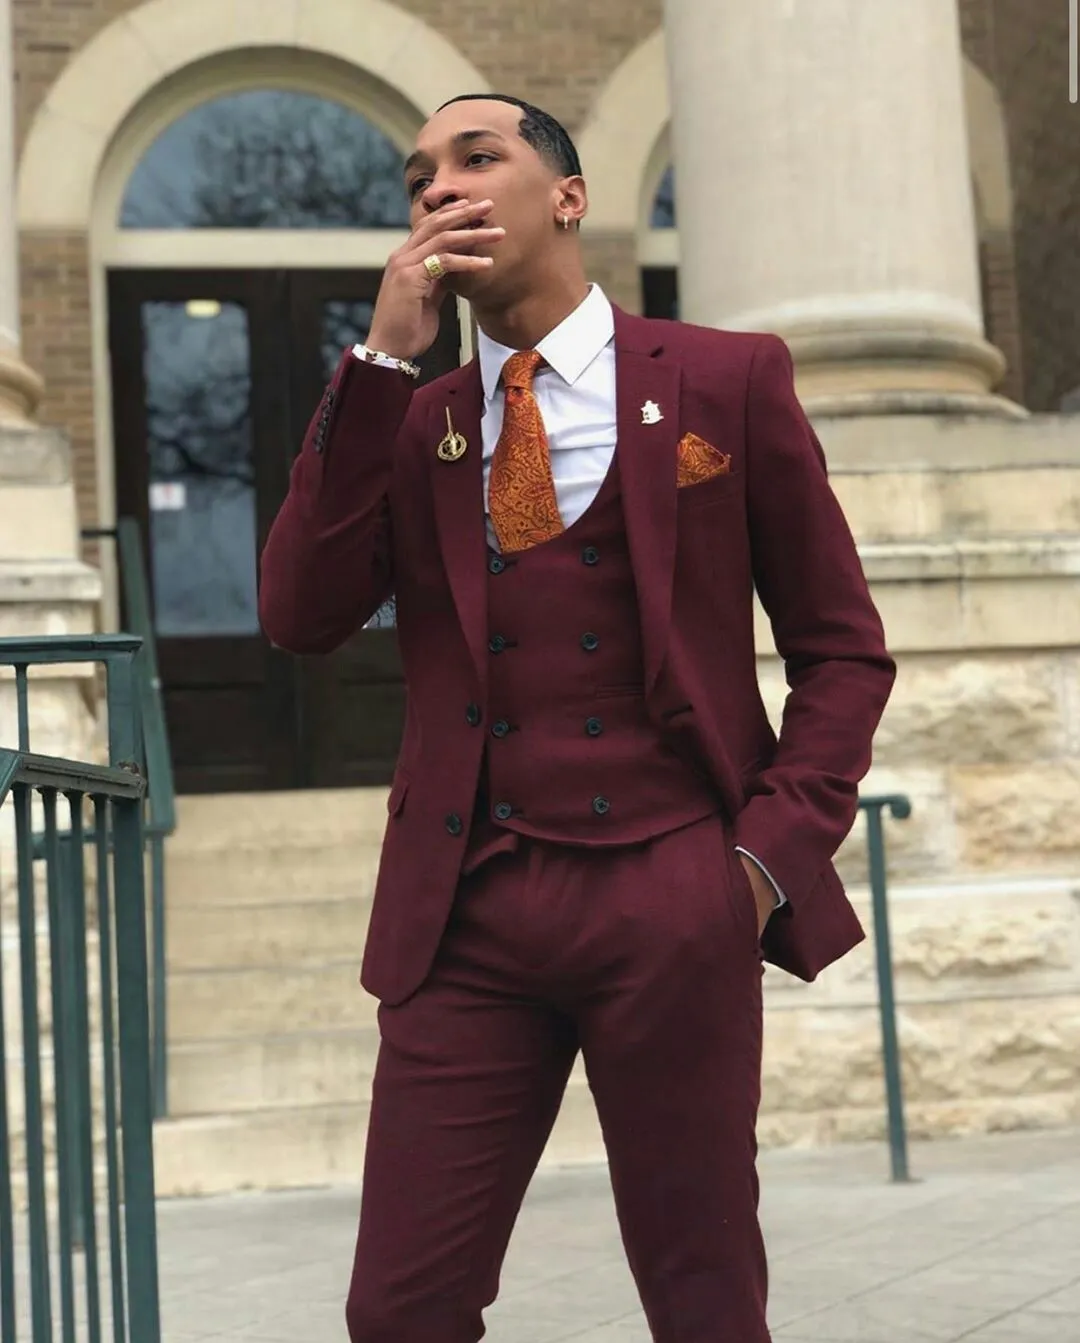 2020 Summer Beach Burgundy Tuxedo For Wedding For Men Dark Red Two Button  Slim Fit Suit With Notched Lapel, Perfect For Prom And Parties Includes  Jacket, Vest, And Pants From Greatvip, $72.46